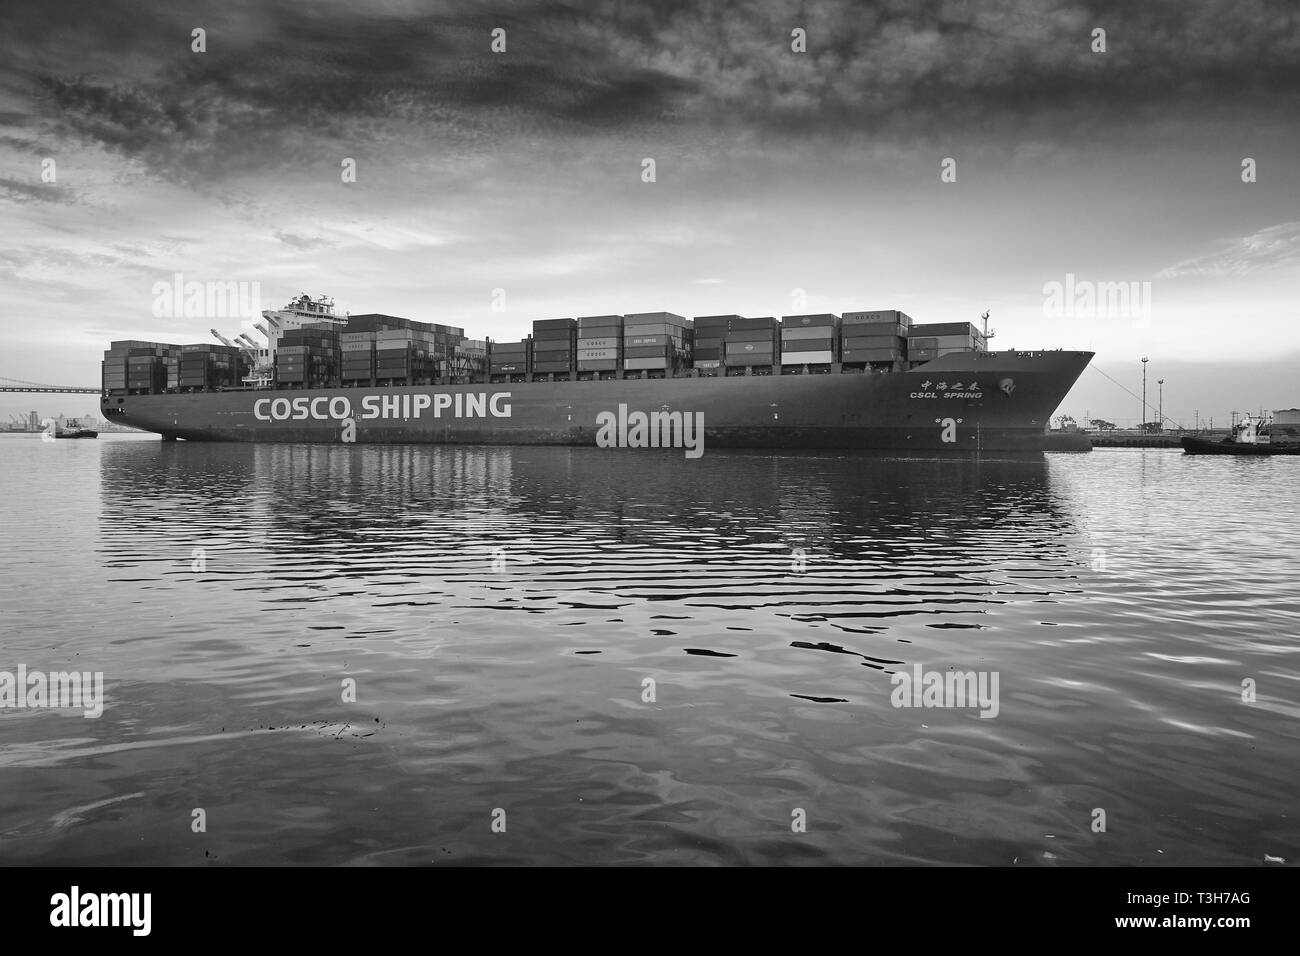 Moody Black And White Image Of The COSCO SHIPPING Container Ship, CSCL SPRING, Departing The Port of Los Angeles, California, USA. Stock Photo